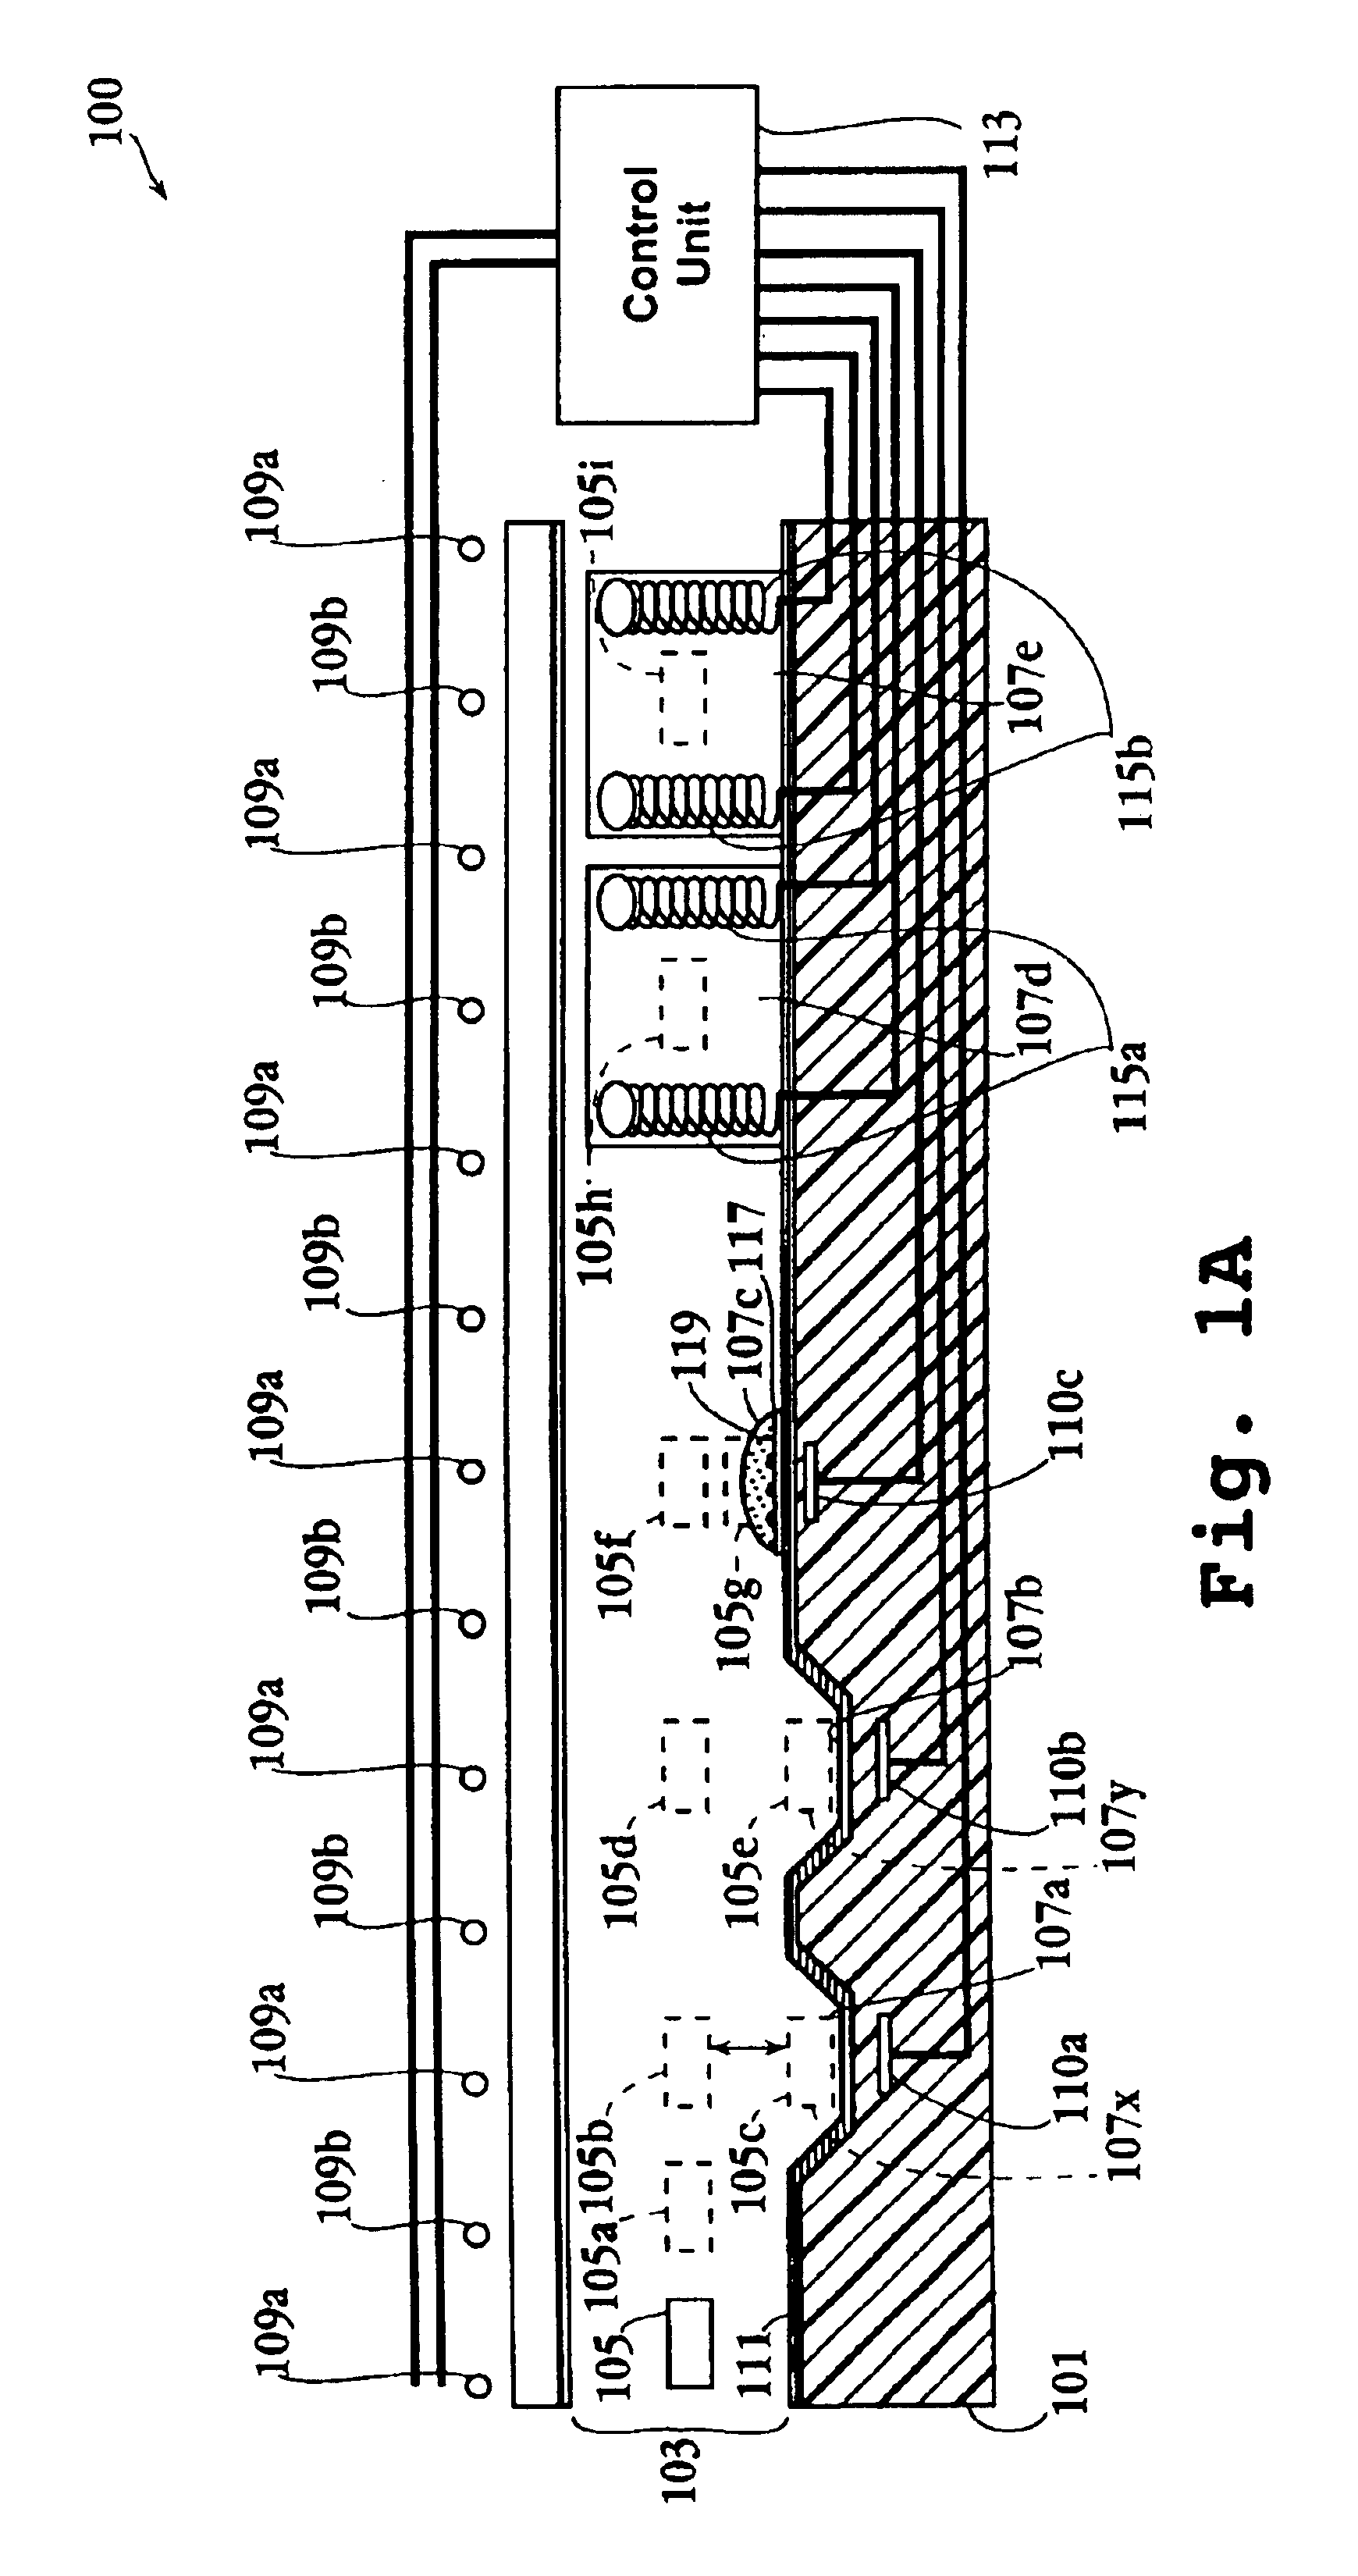 Microlaboratory devices and methods